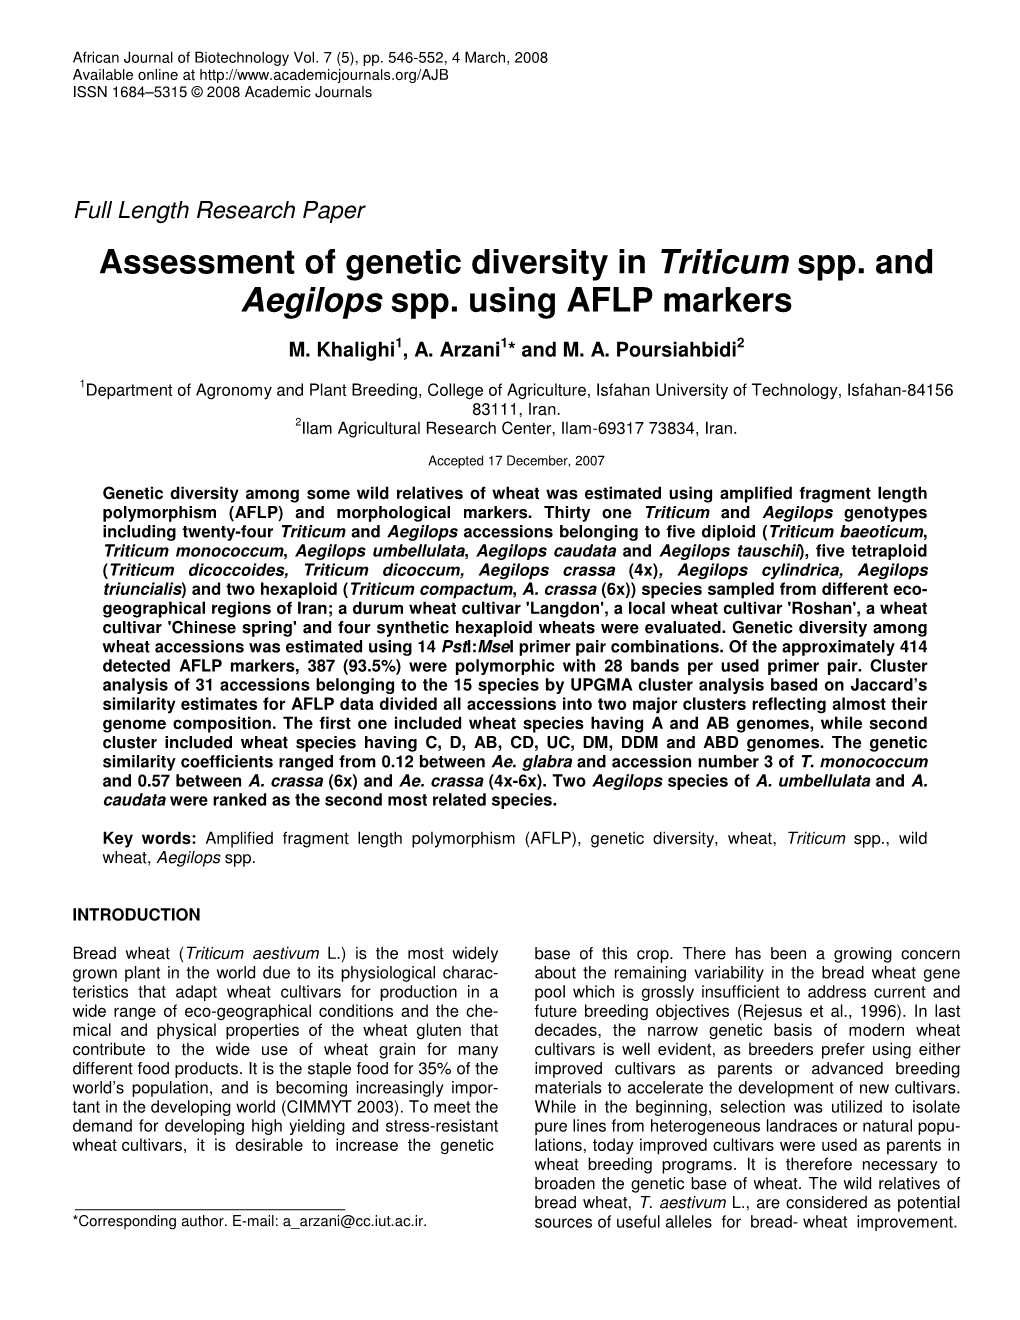 Assessment of Genetic Diversity in Triticum Spp. and Aegilops Spp. Using AFLP Markers